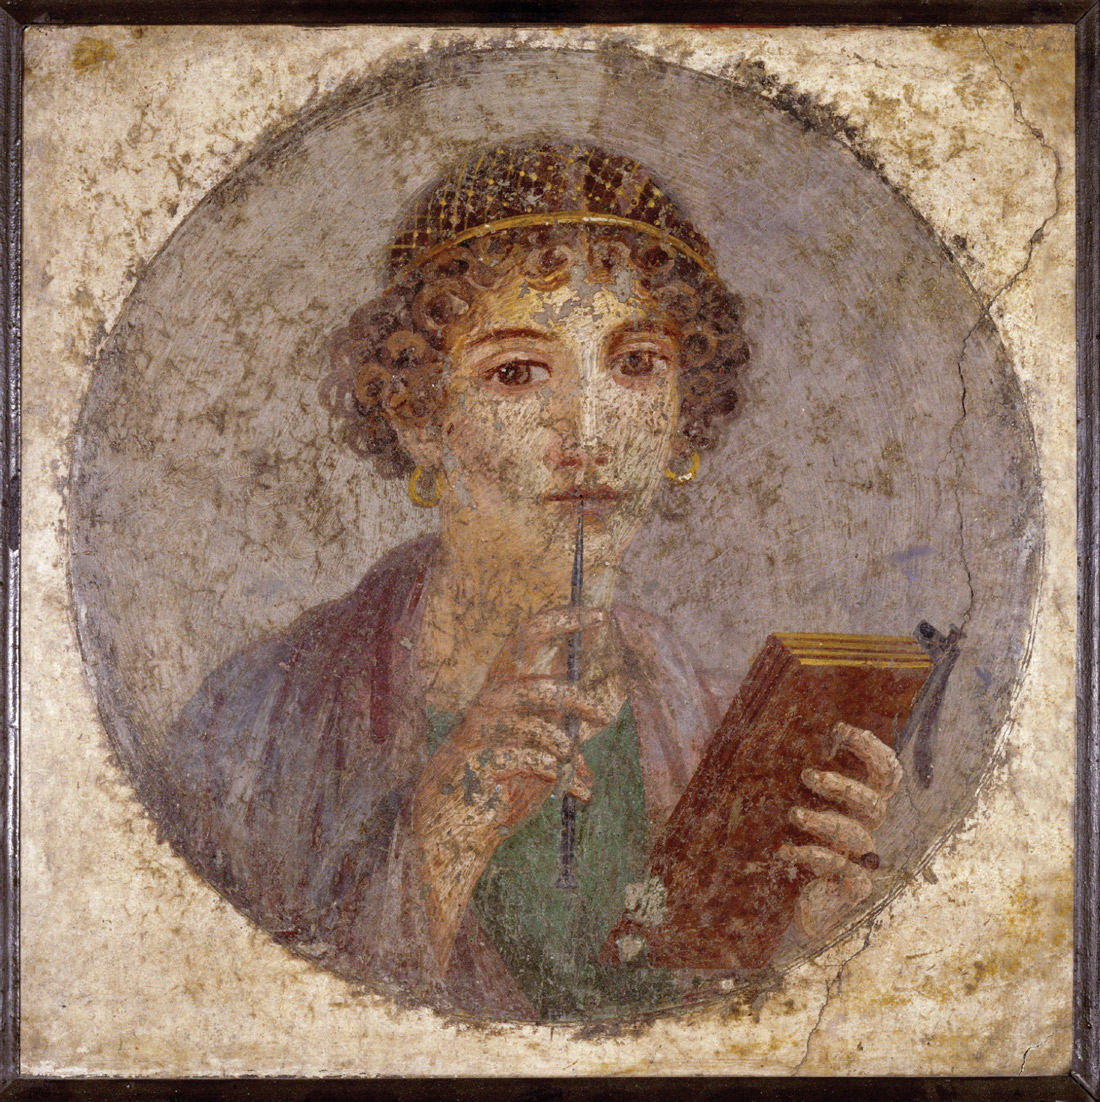 Fresco from Pompeii depicting a woman holding a set of wax tablets and a stylus, ca. 50 AD. Courtesy Museo Archeologico Nationale, Naples.